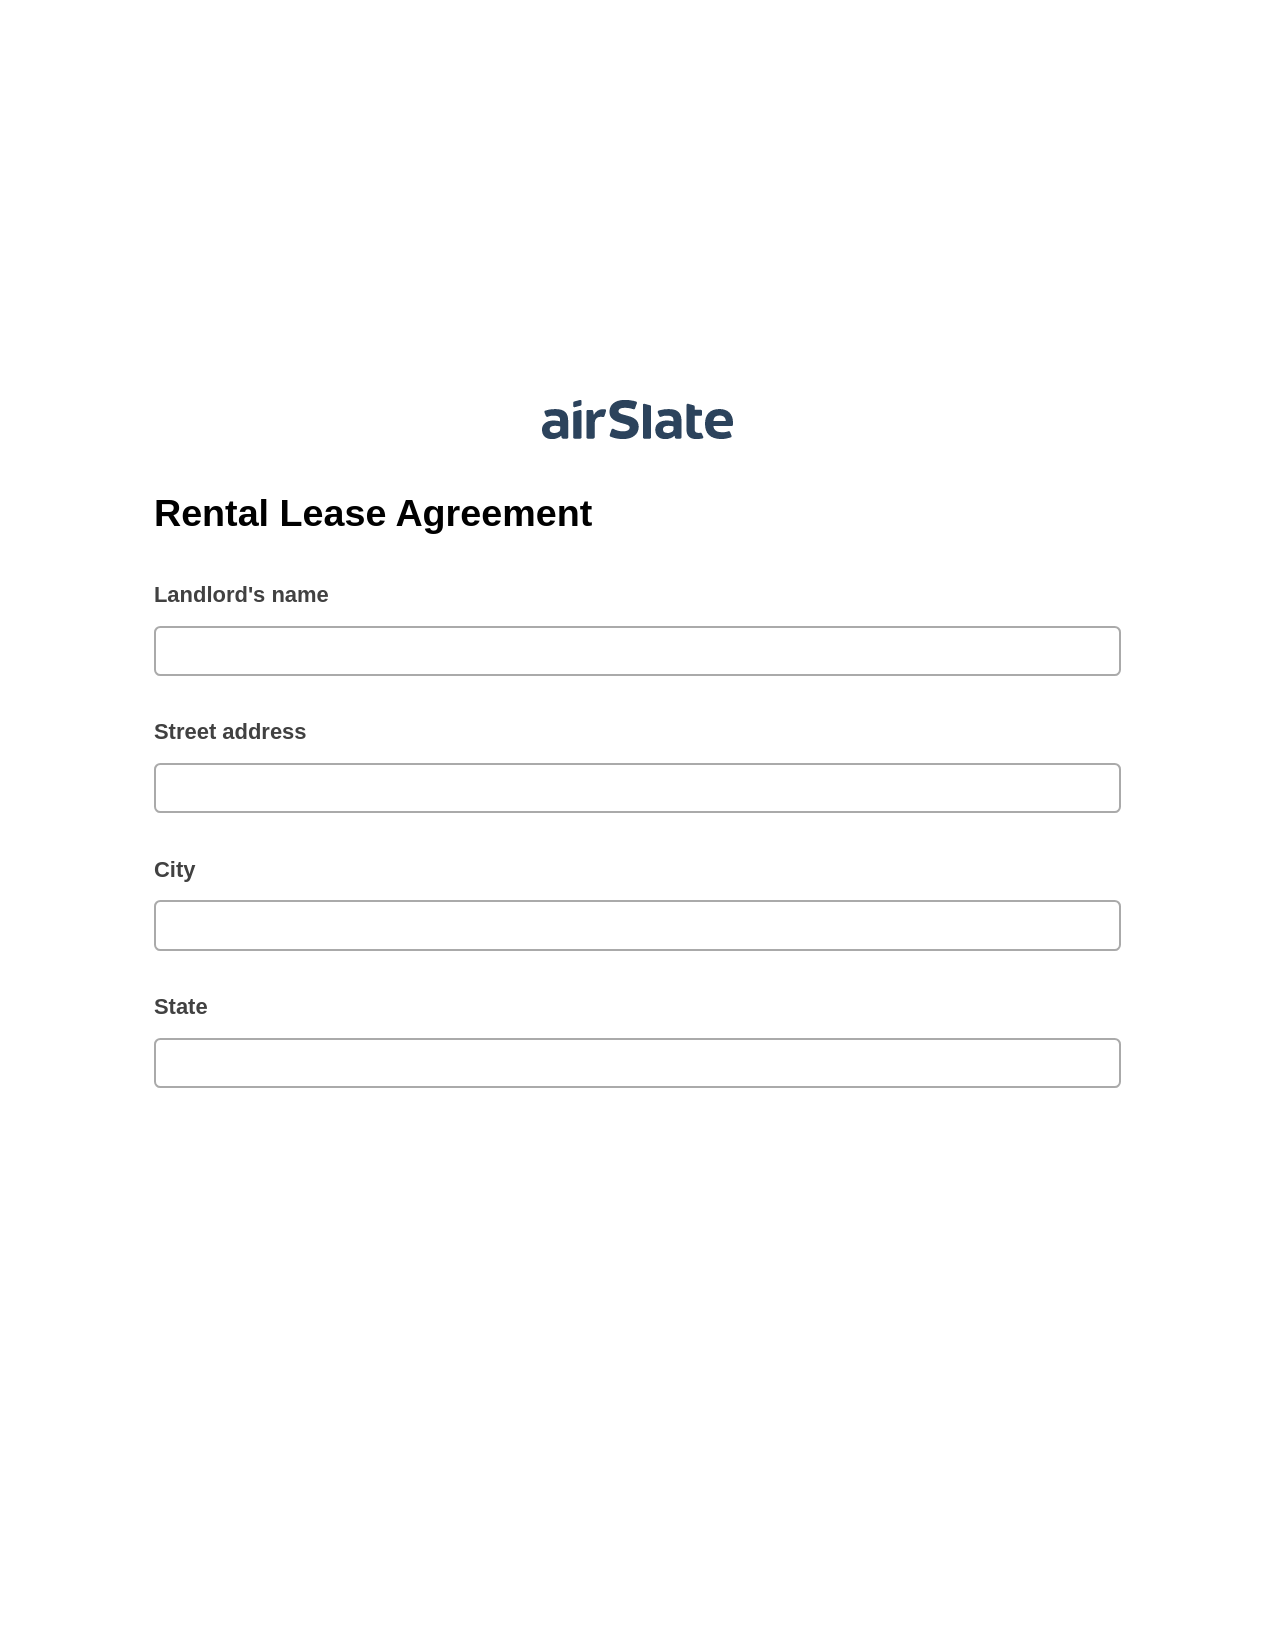 Rental Lease Agreement Pre-fill from MySQL Dropdown Options Bot, Mailchimp send Campaign bot, Export to NetSuite Record Bot